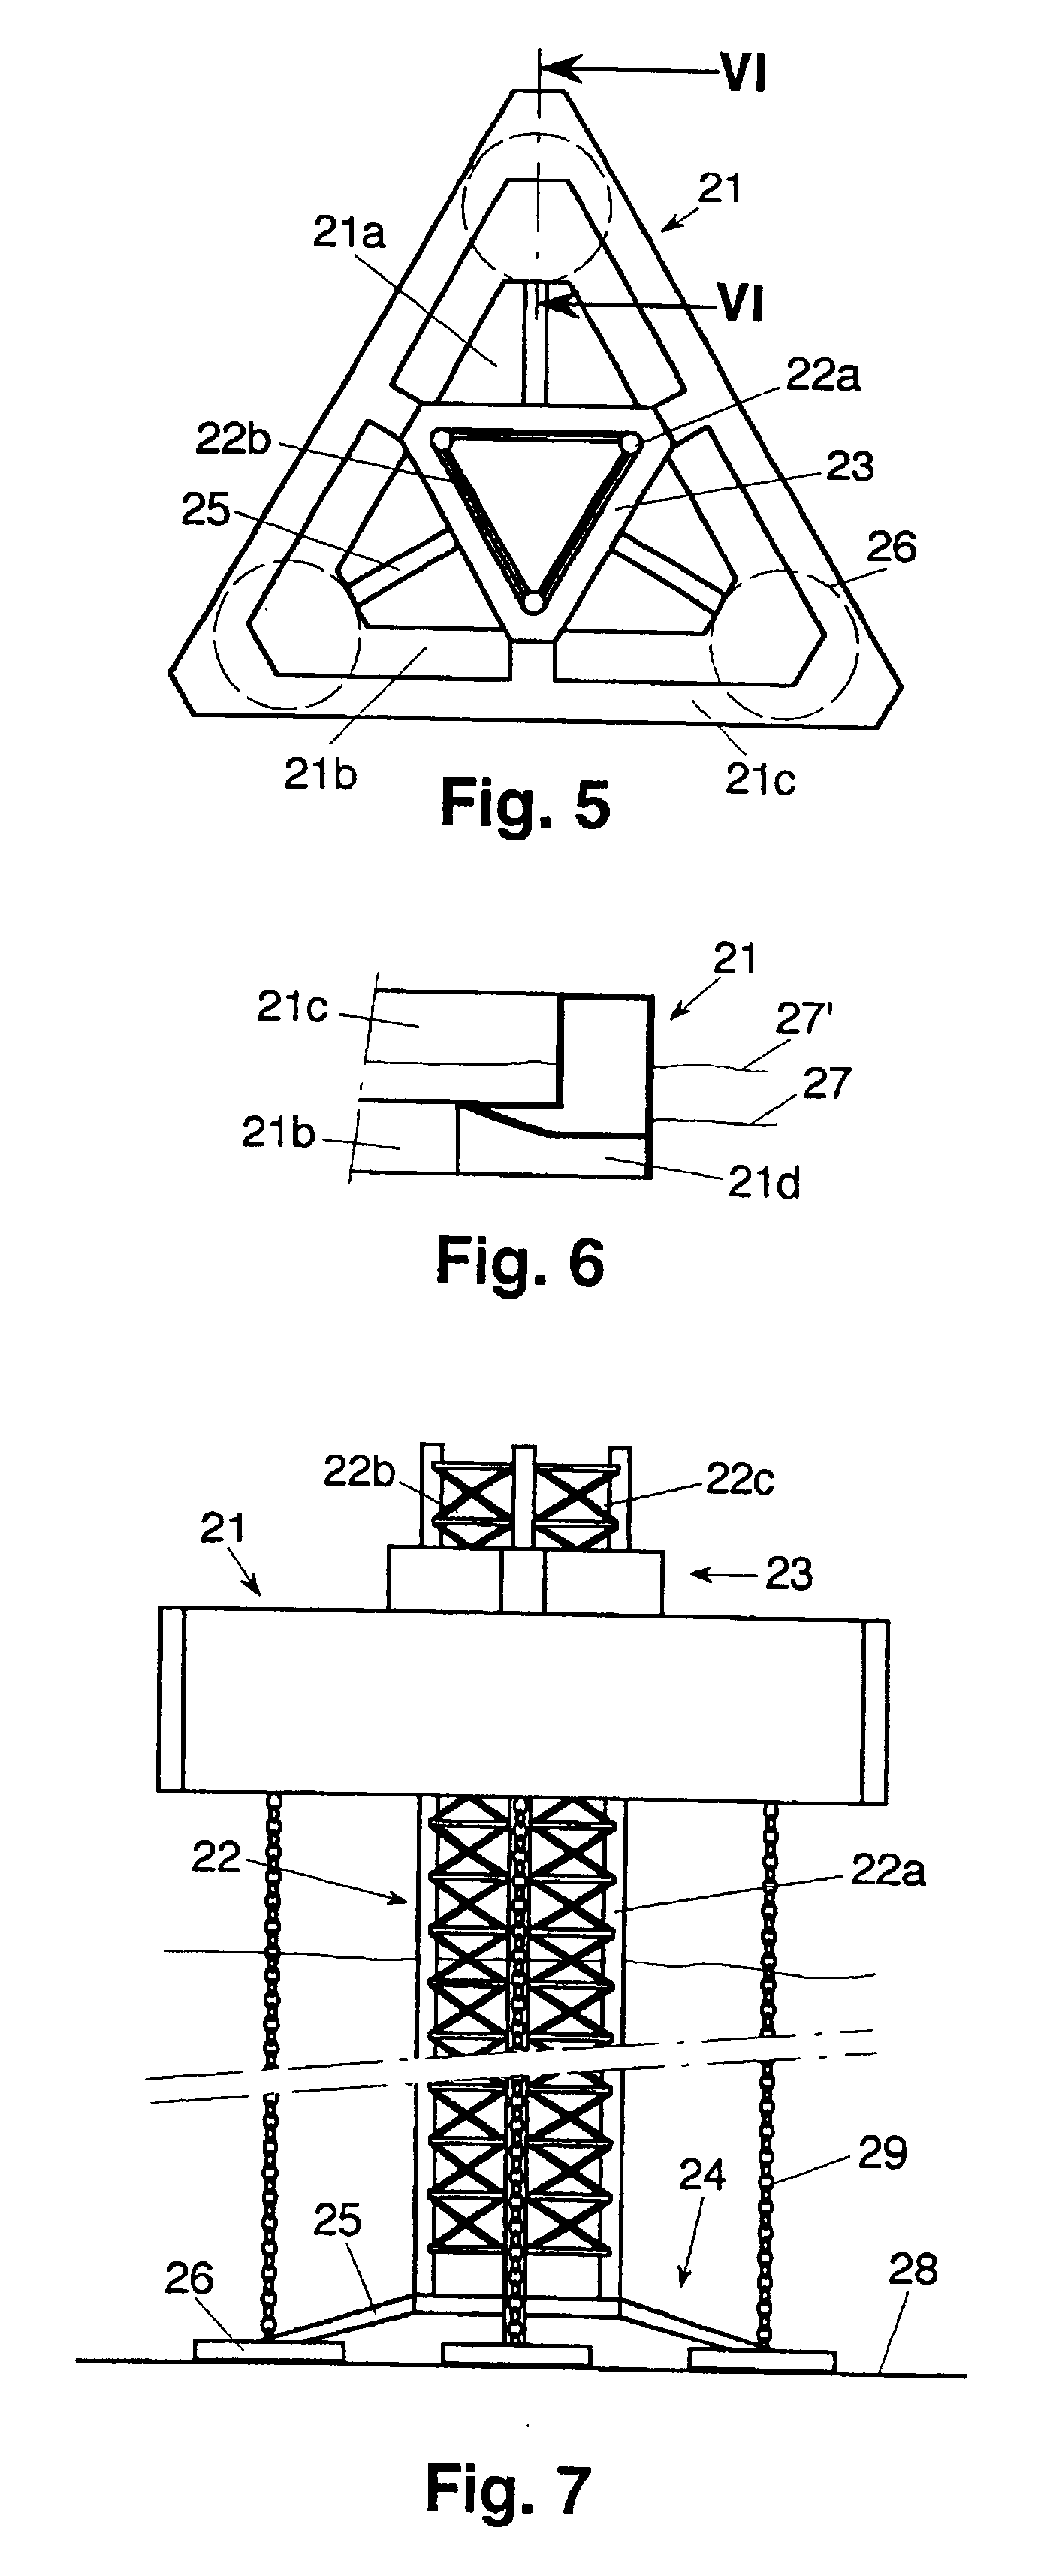 Jack-up platform comprising a deck structure and a single supporting column, and method for installing such jack-up platform